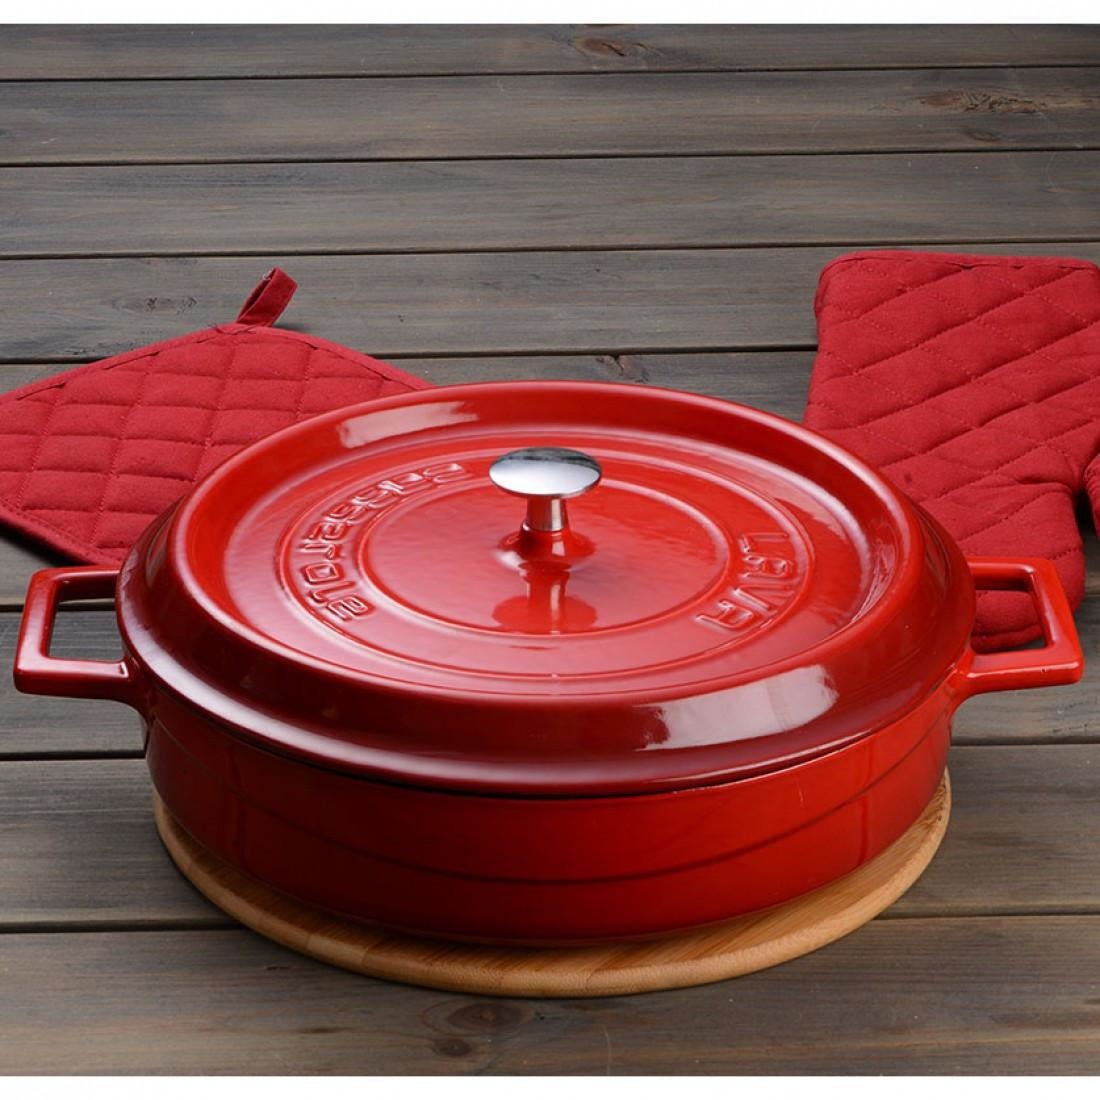 Lava Cast Iron Lava Enameled Cast Iron Skillet 11 inch-Edition Series Color: Red LV Y TV 28 EDT R